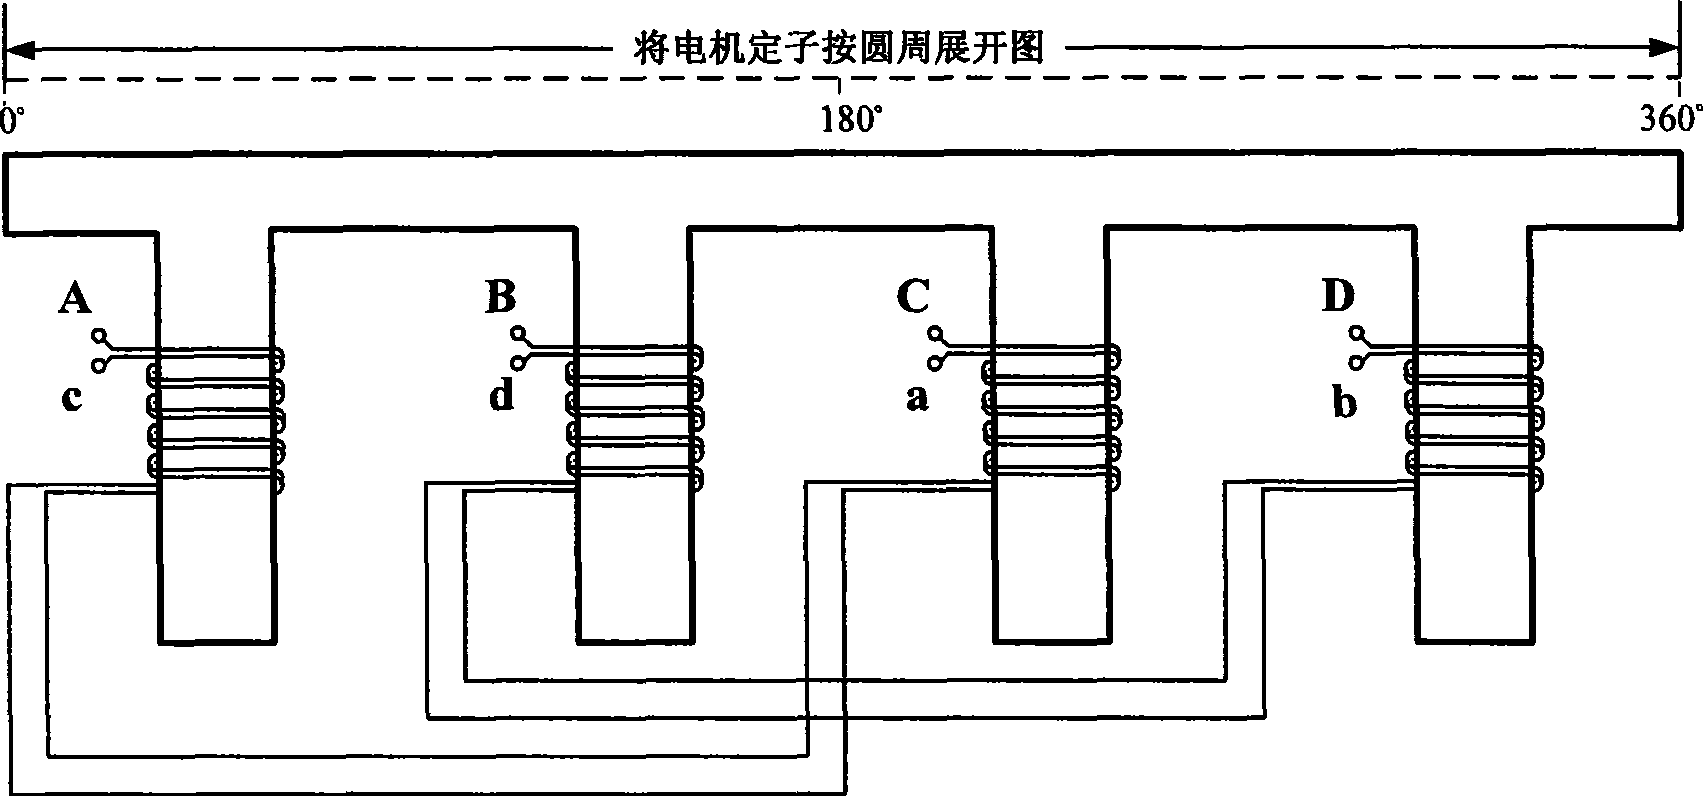 Automobile engine cooling fan control system based on four-phase double-wire winding brushless DC motor